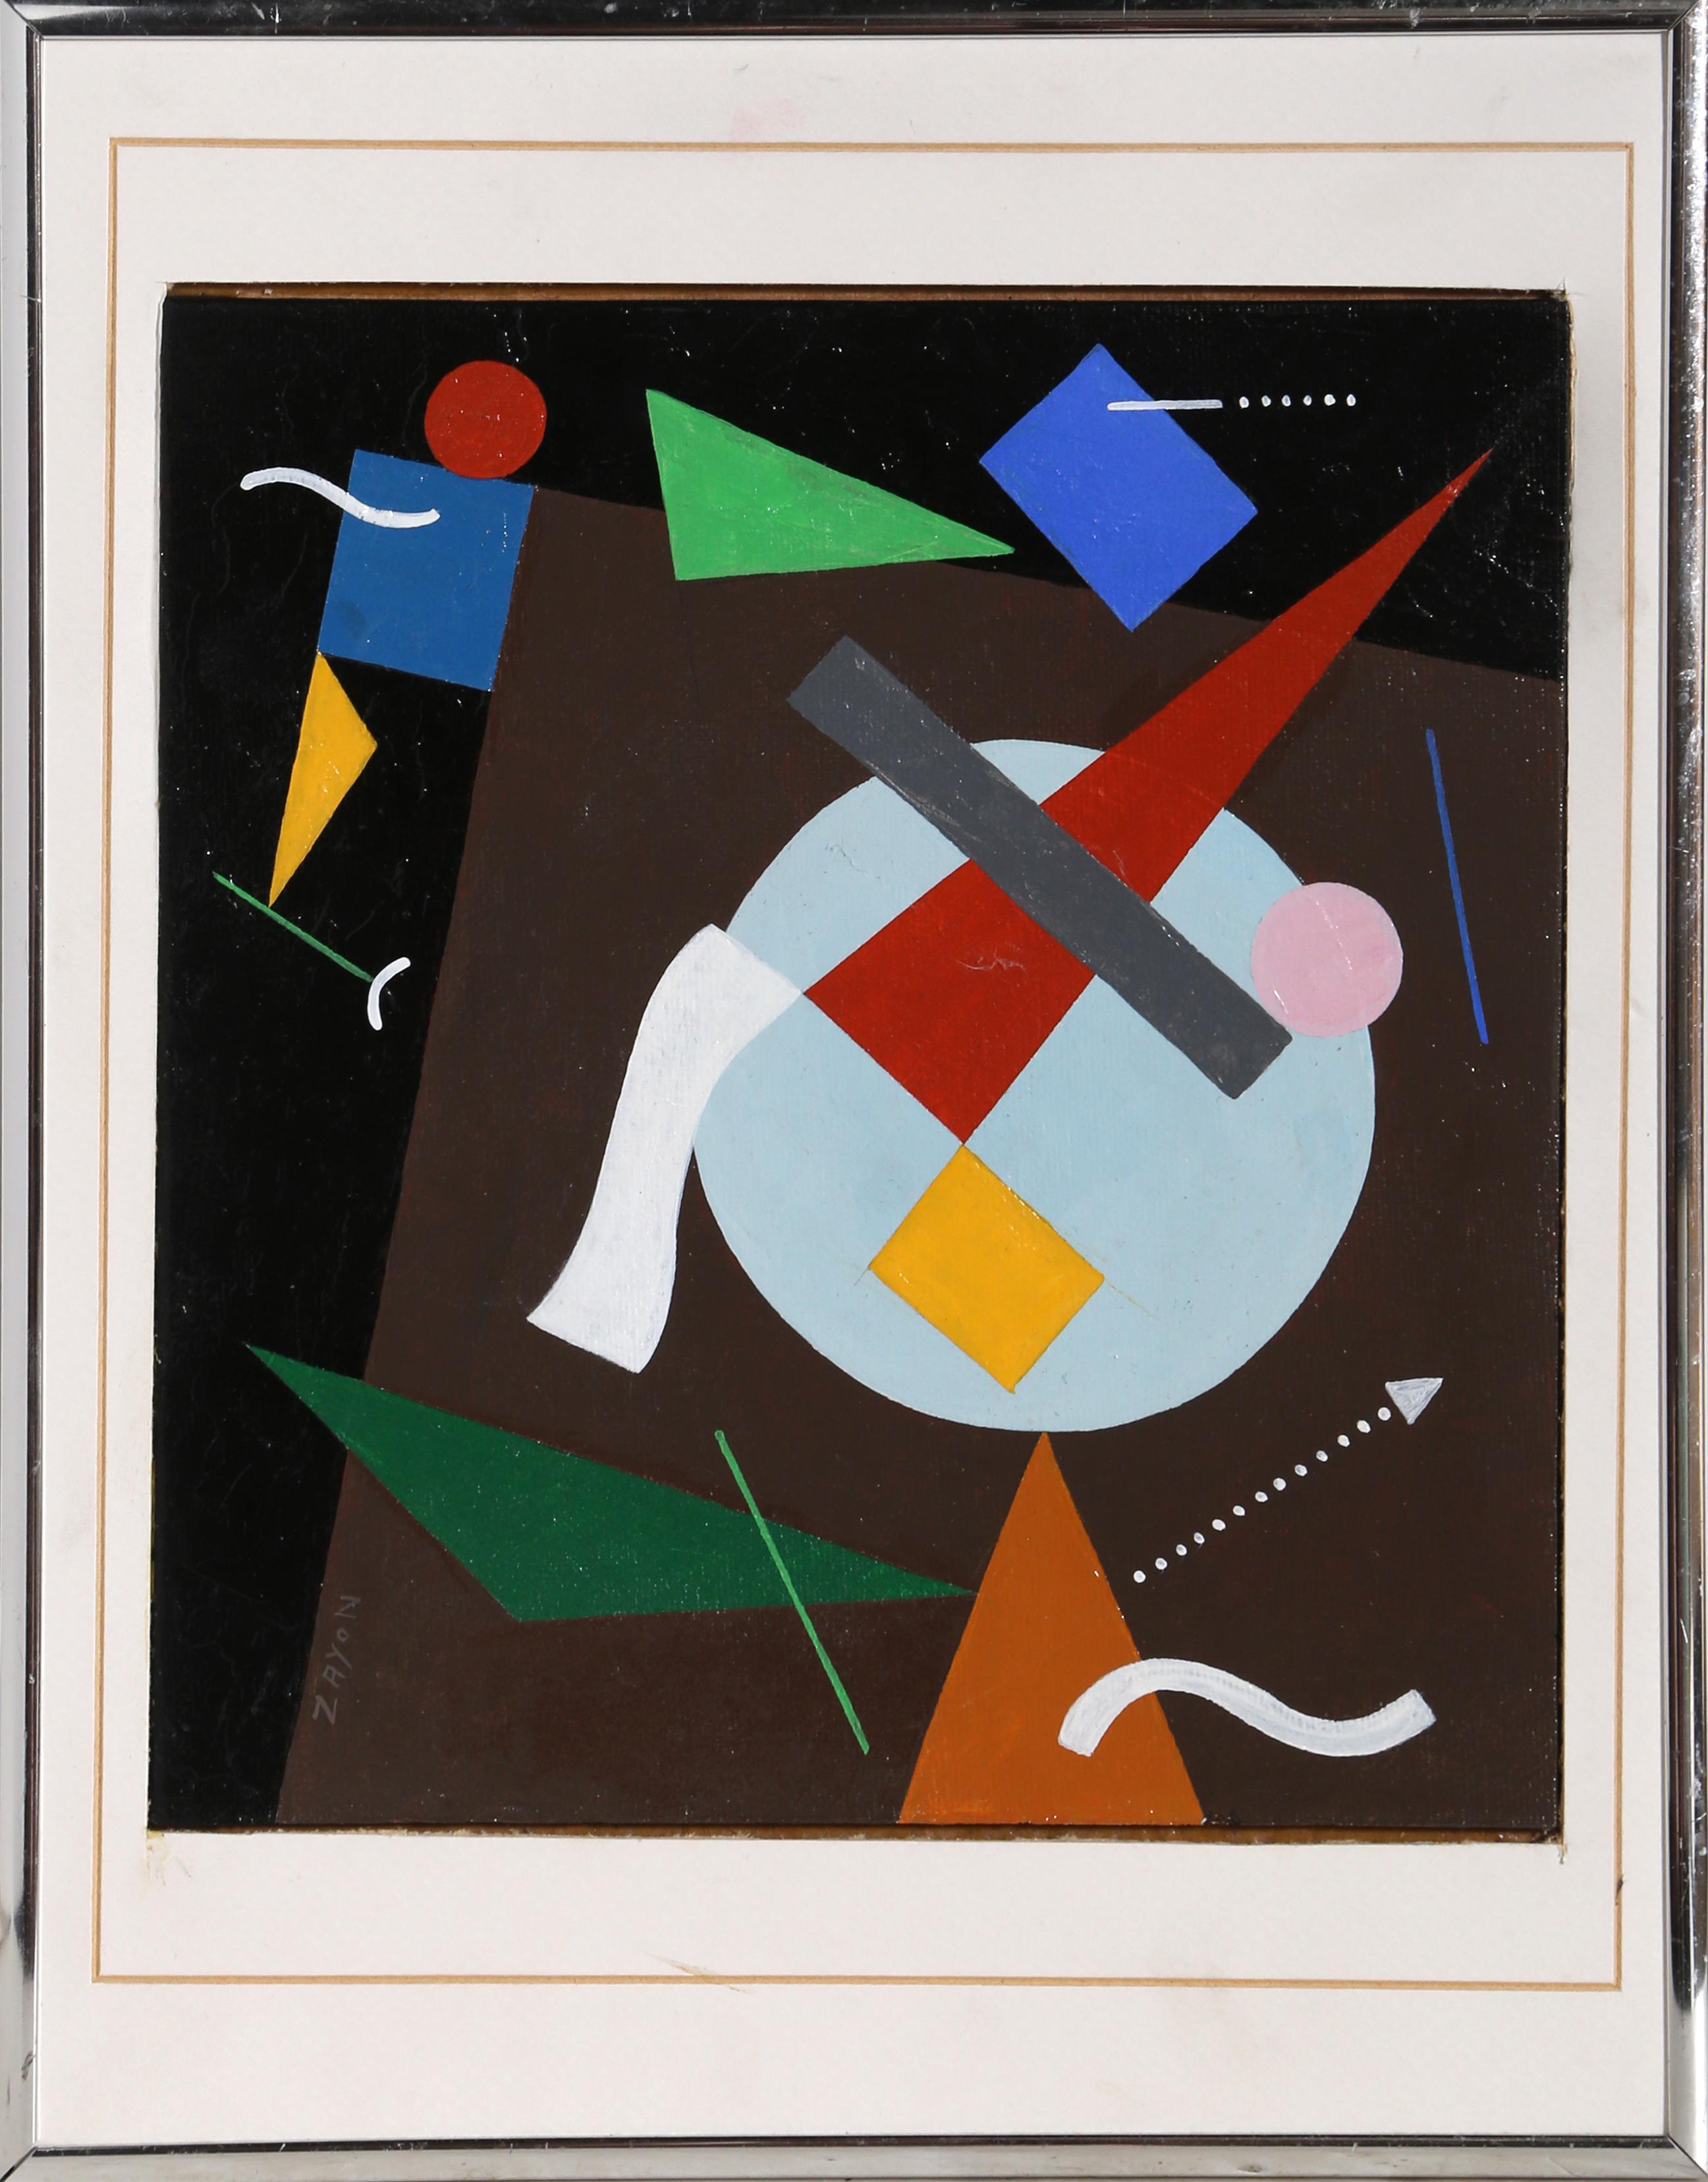 Artist: Semour Zayon American (1930 - )
Title: Construction Composition (After Kandinsky)
Medium: Oil on Board, signed 
Size: 10 x 9.5 inches
Frame: 14 x 11.25 inches